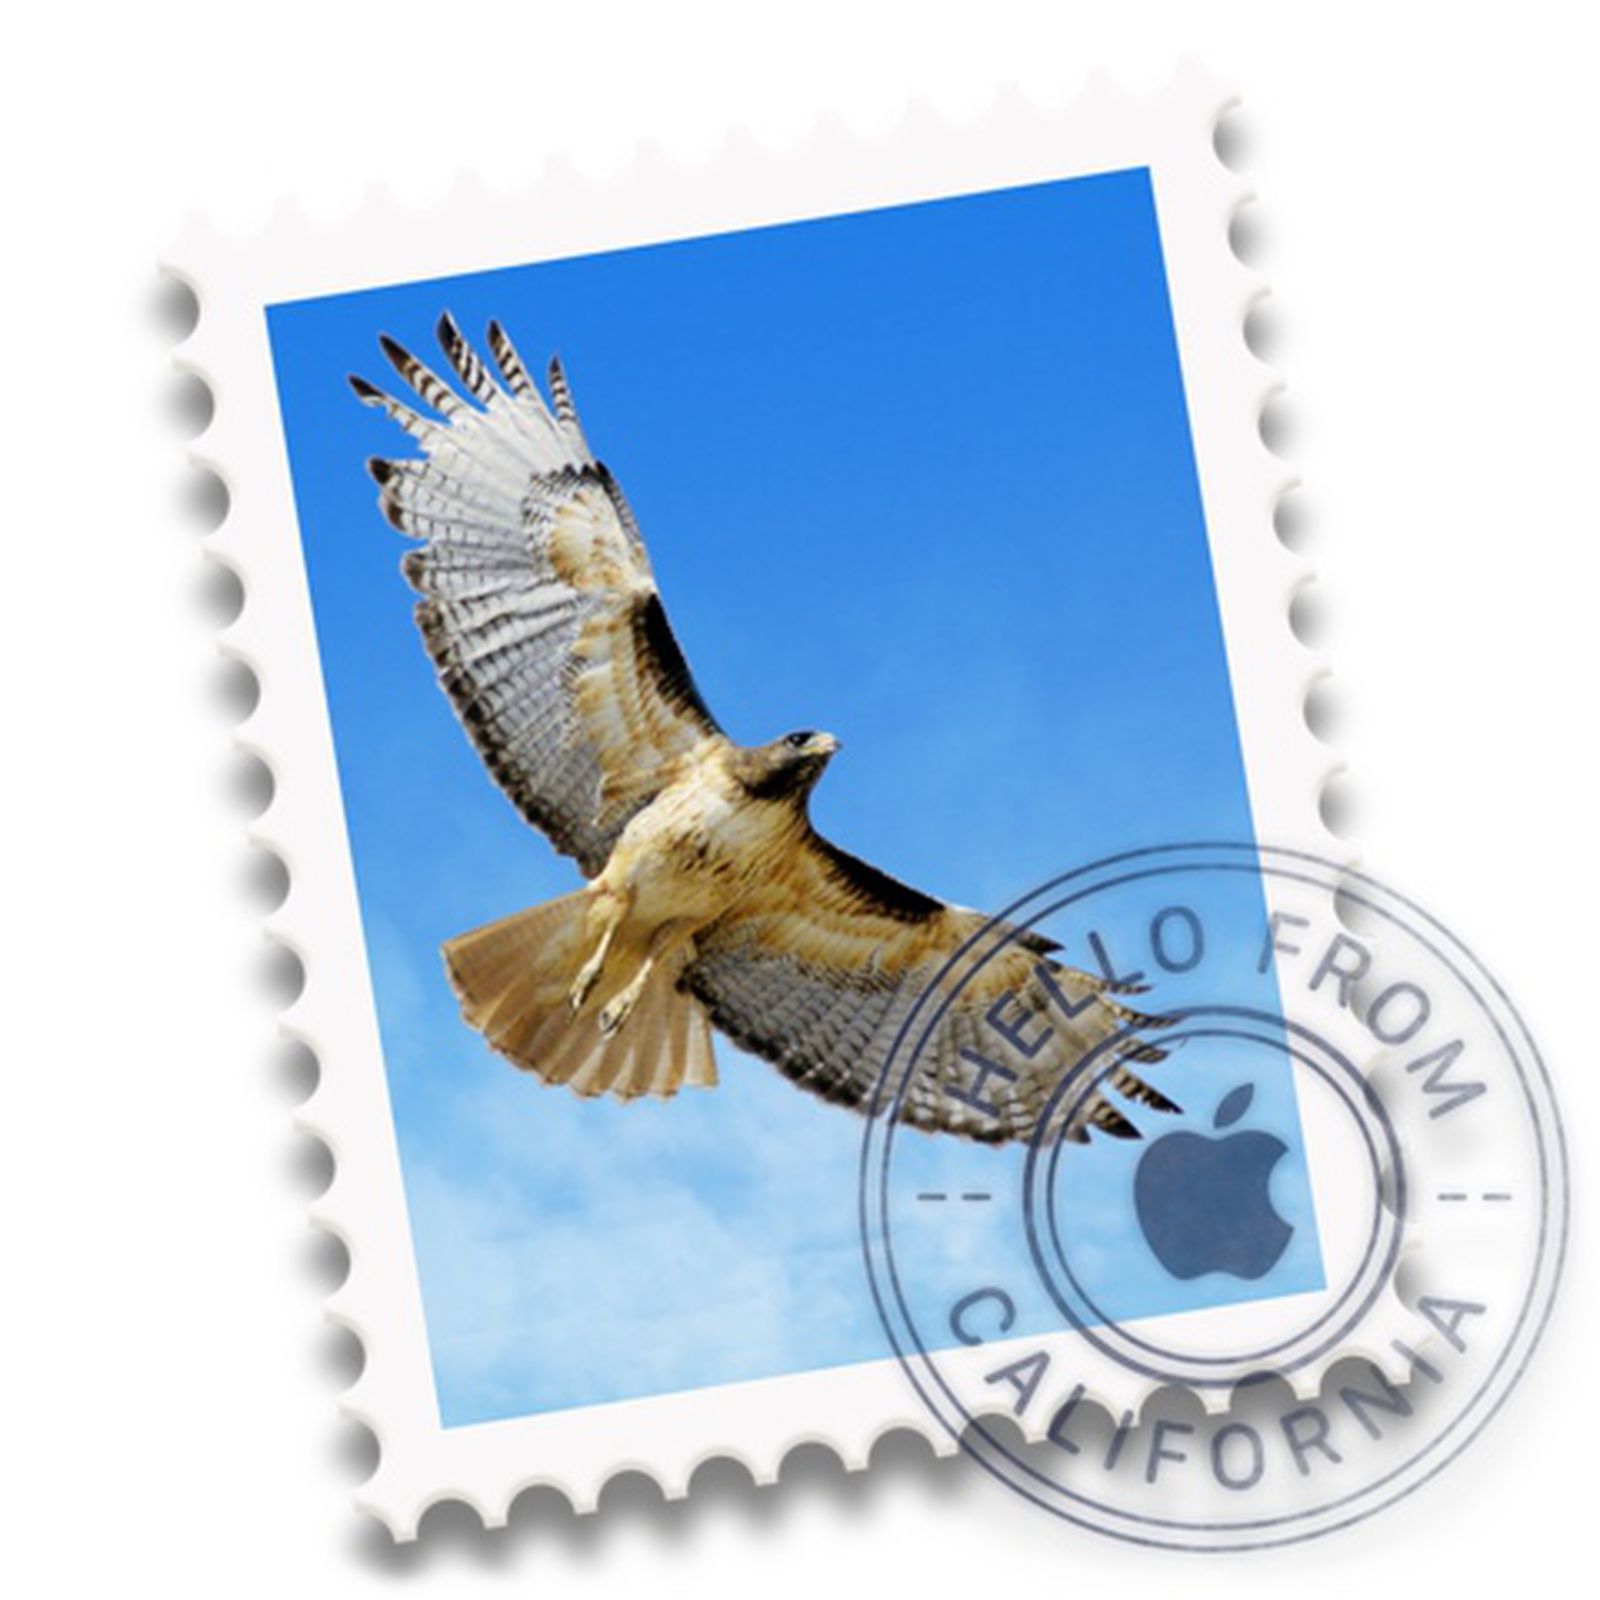 set default apps for email mac os x